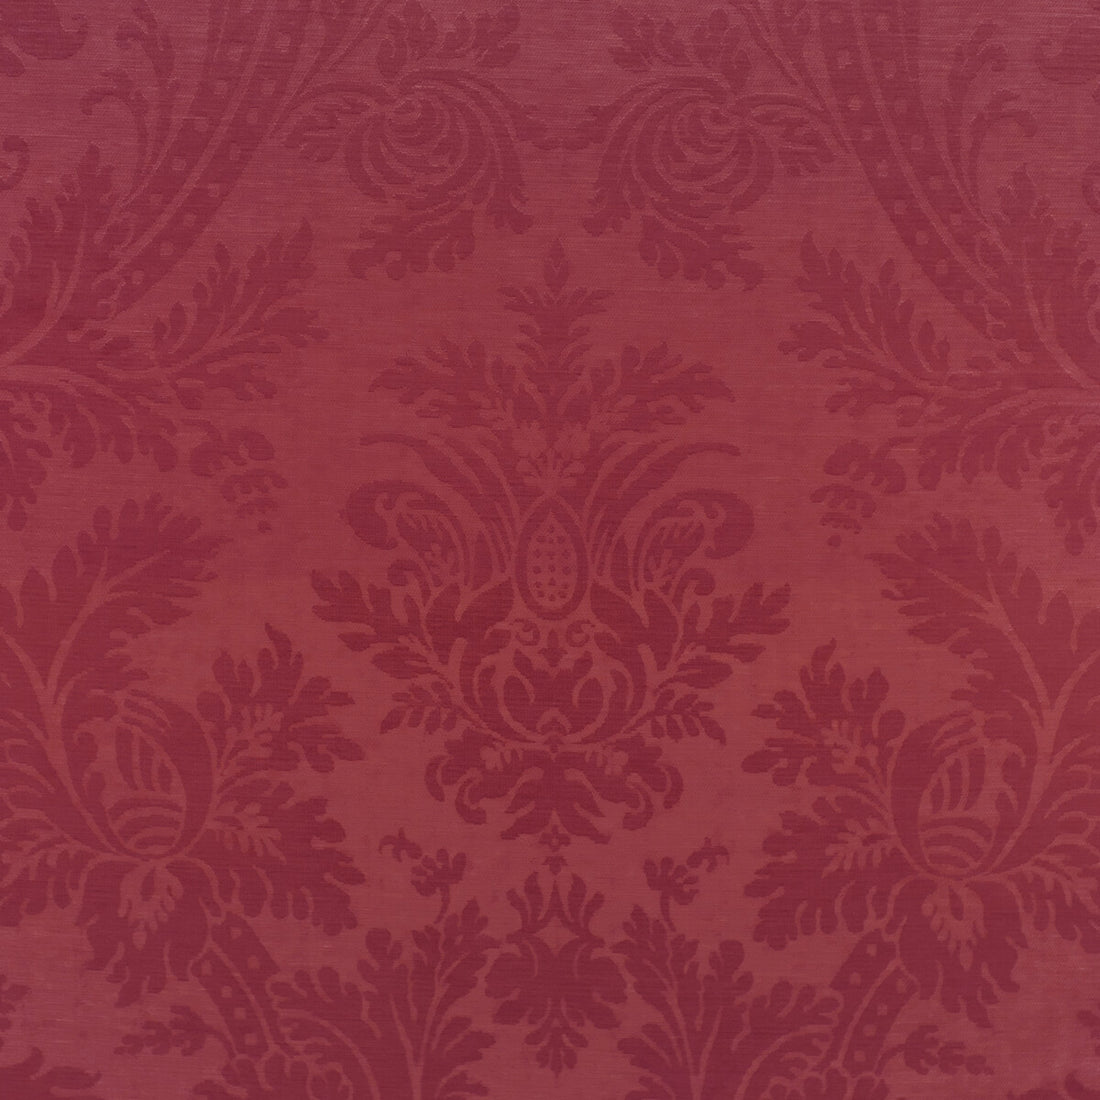 Arnaud Damask fabric in red color - pattern 8023150.19.0 - by Brunschwig &amp; Fils in the Vienne Silks collection